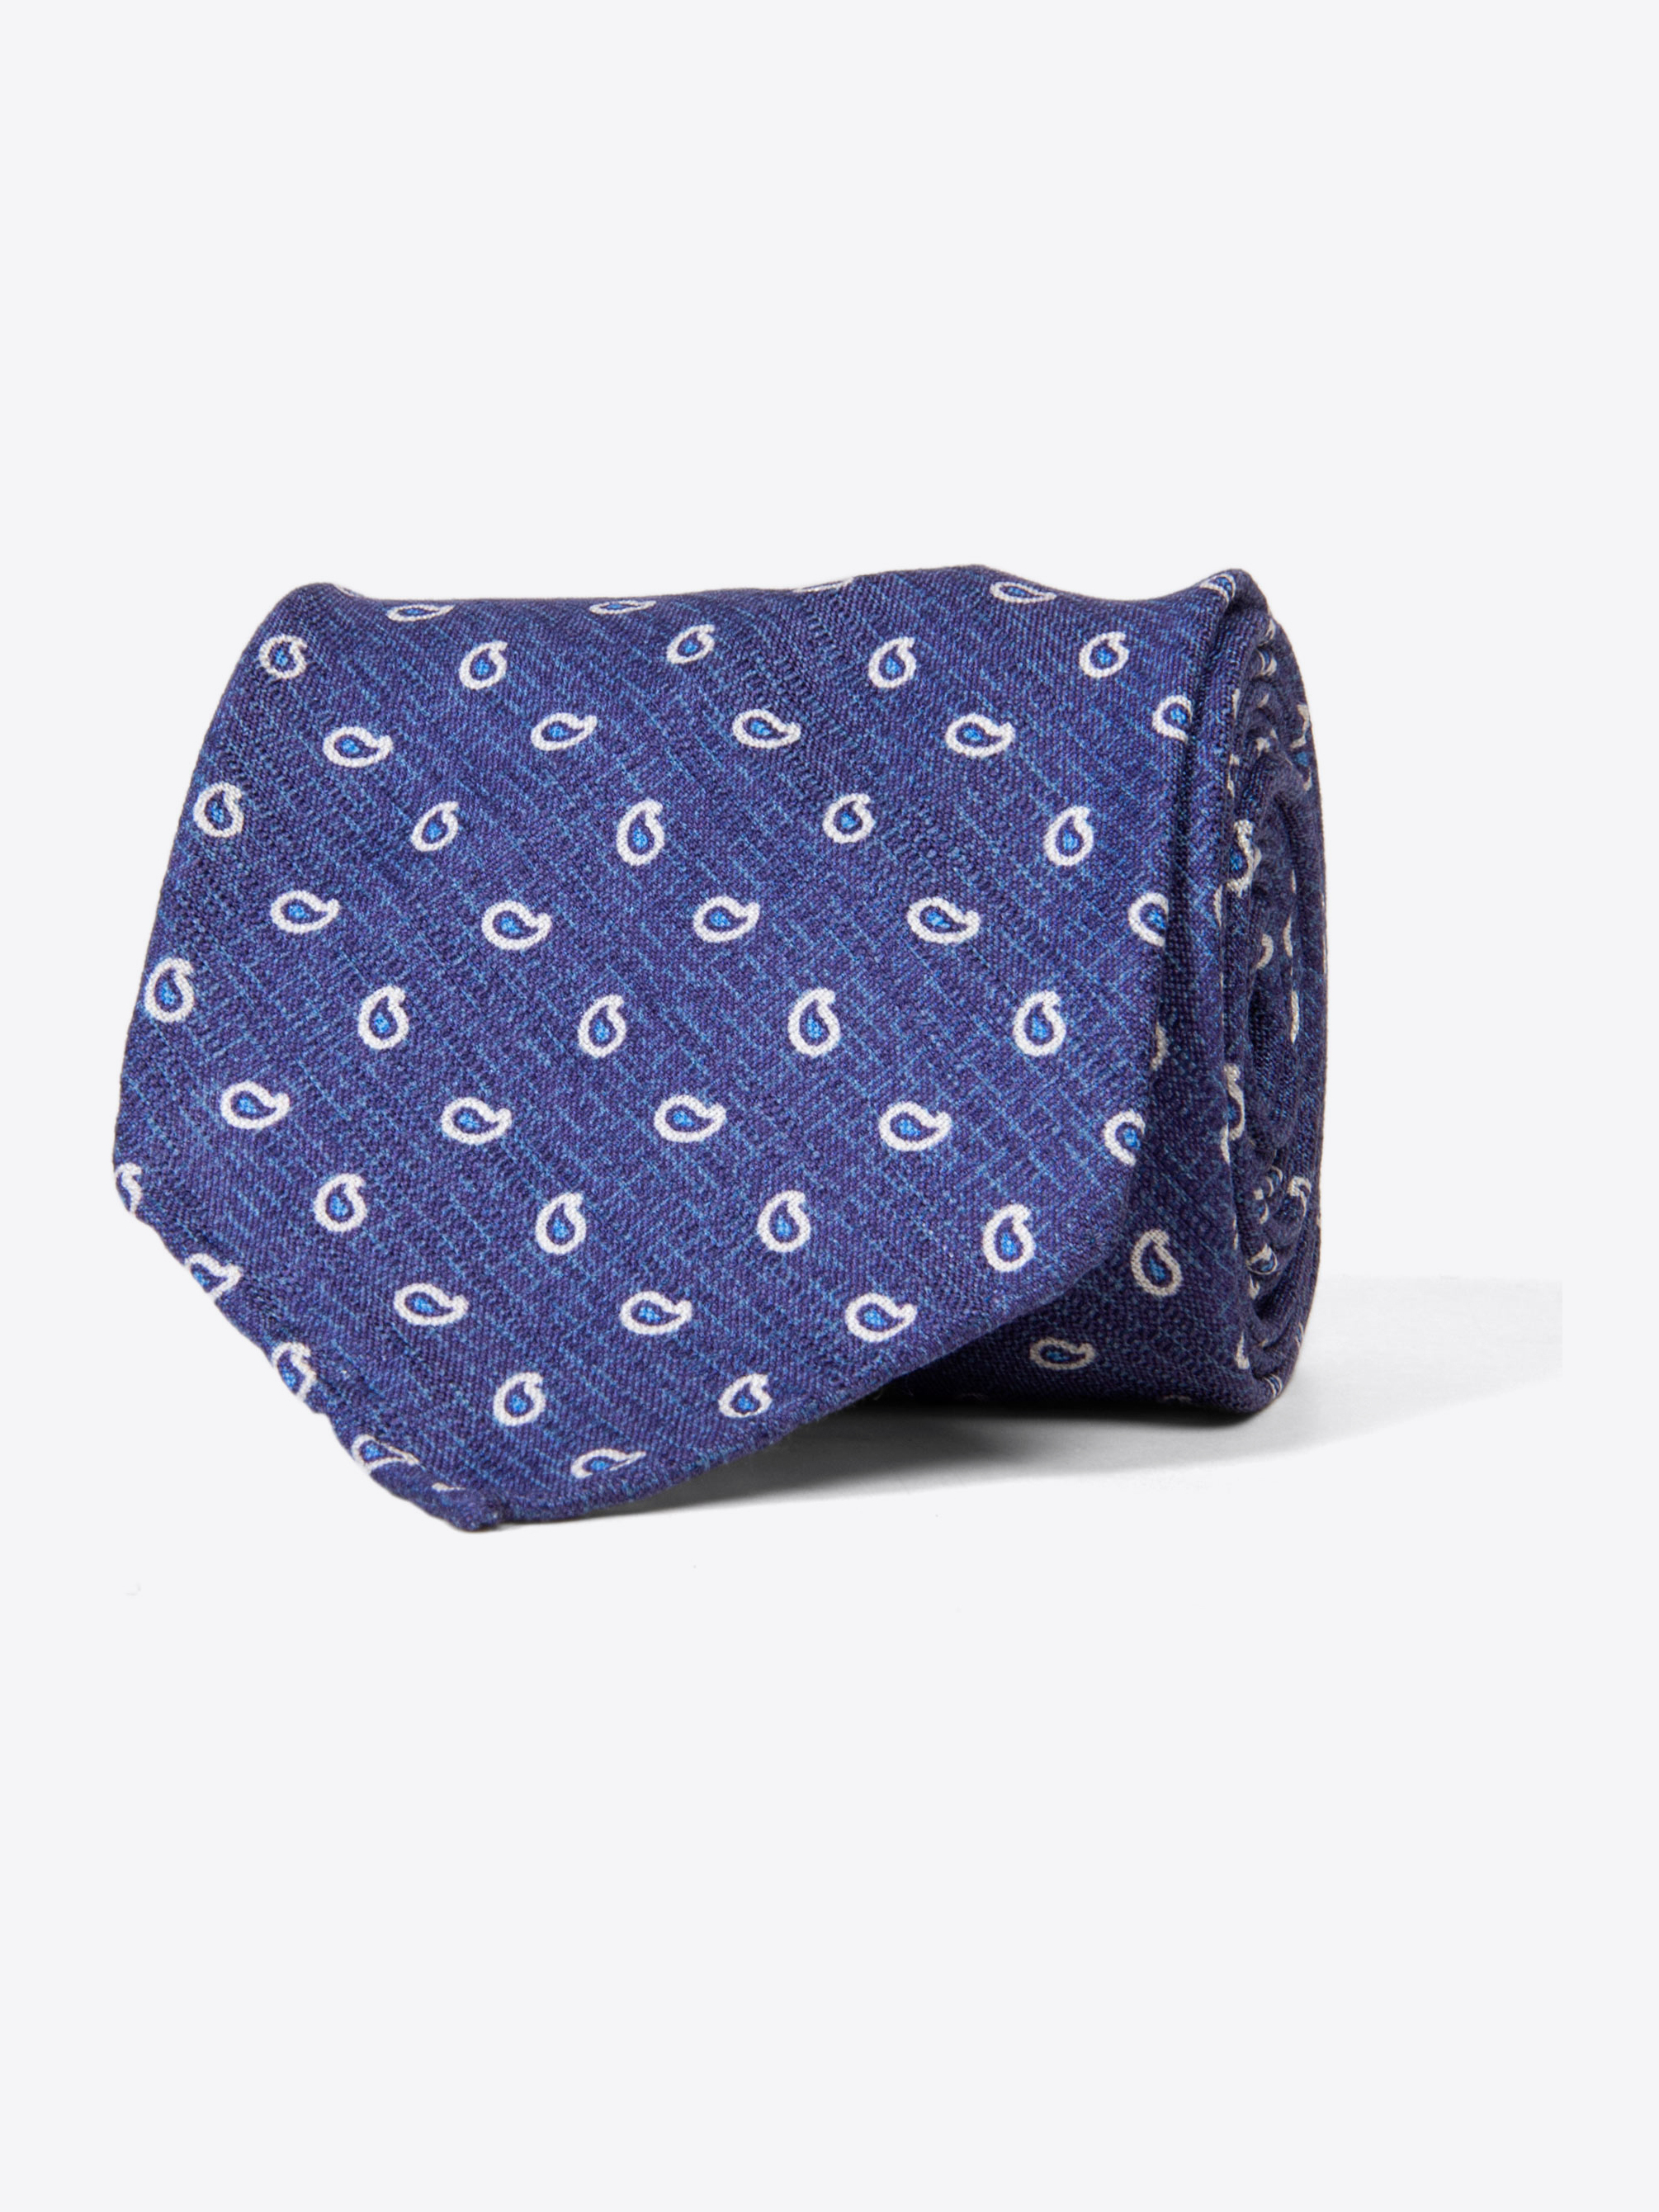 Zoom Image of Olmo Blue and White Paisley Print Tie